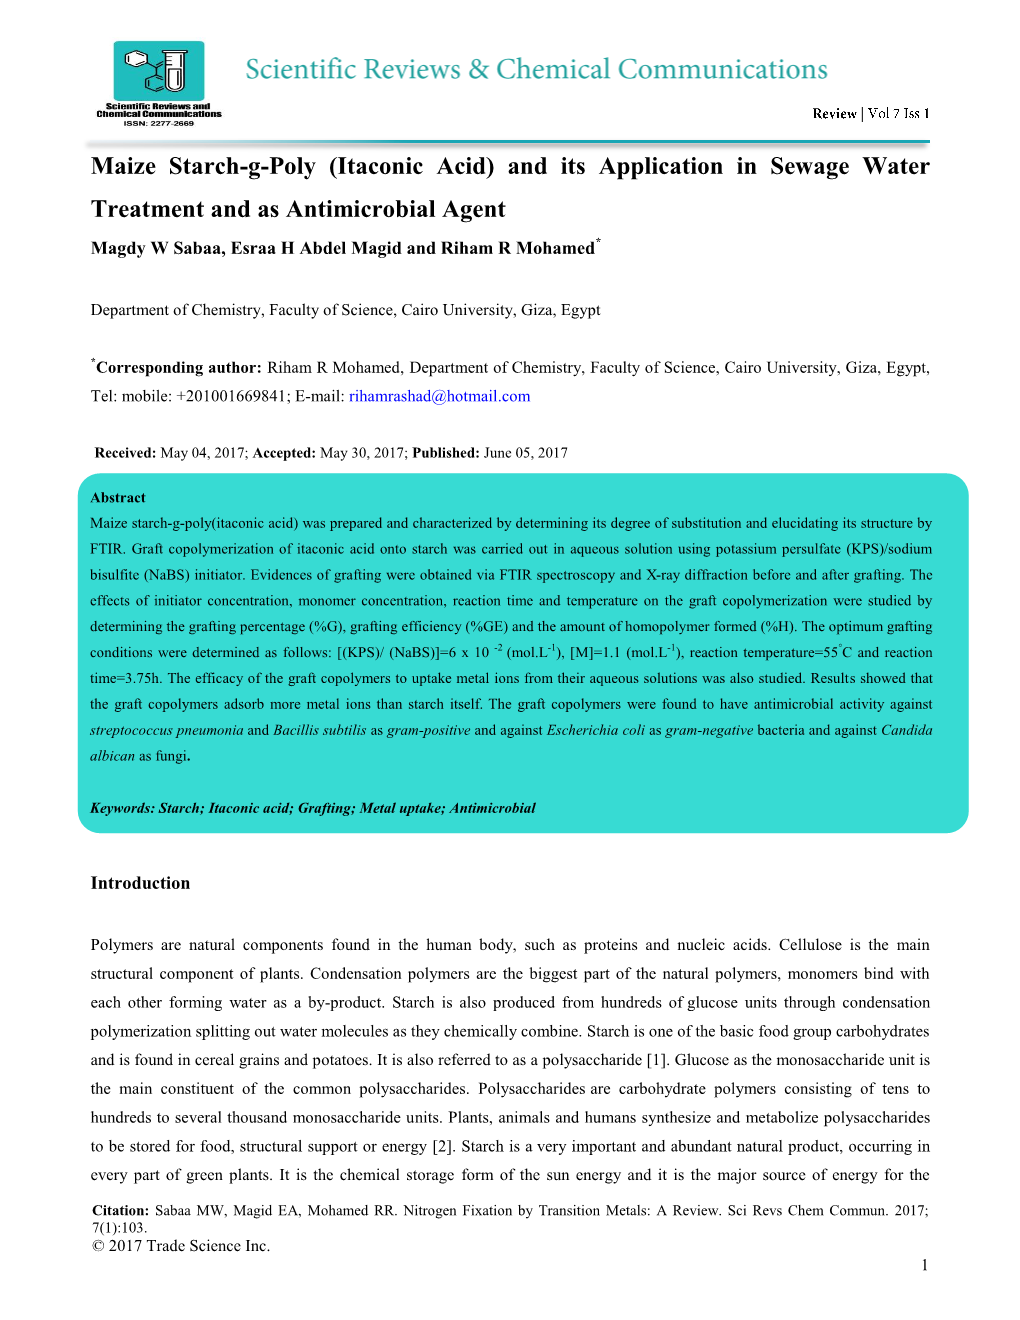 Maize Starch-G-Poly (Itaconic Acid) and Its Application in Sewage Water